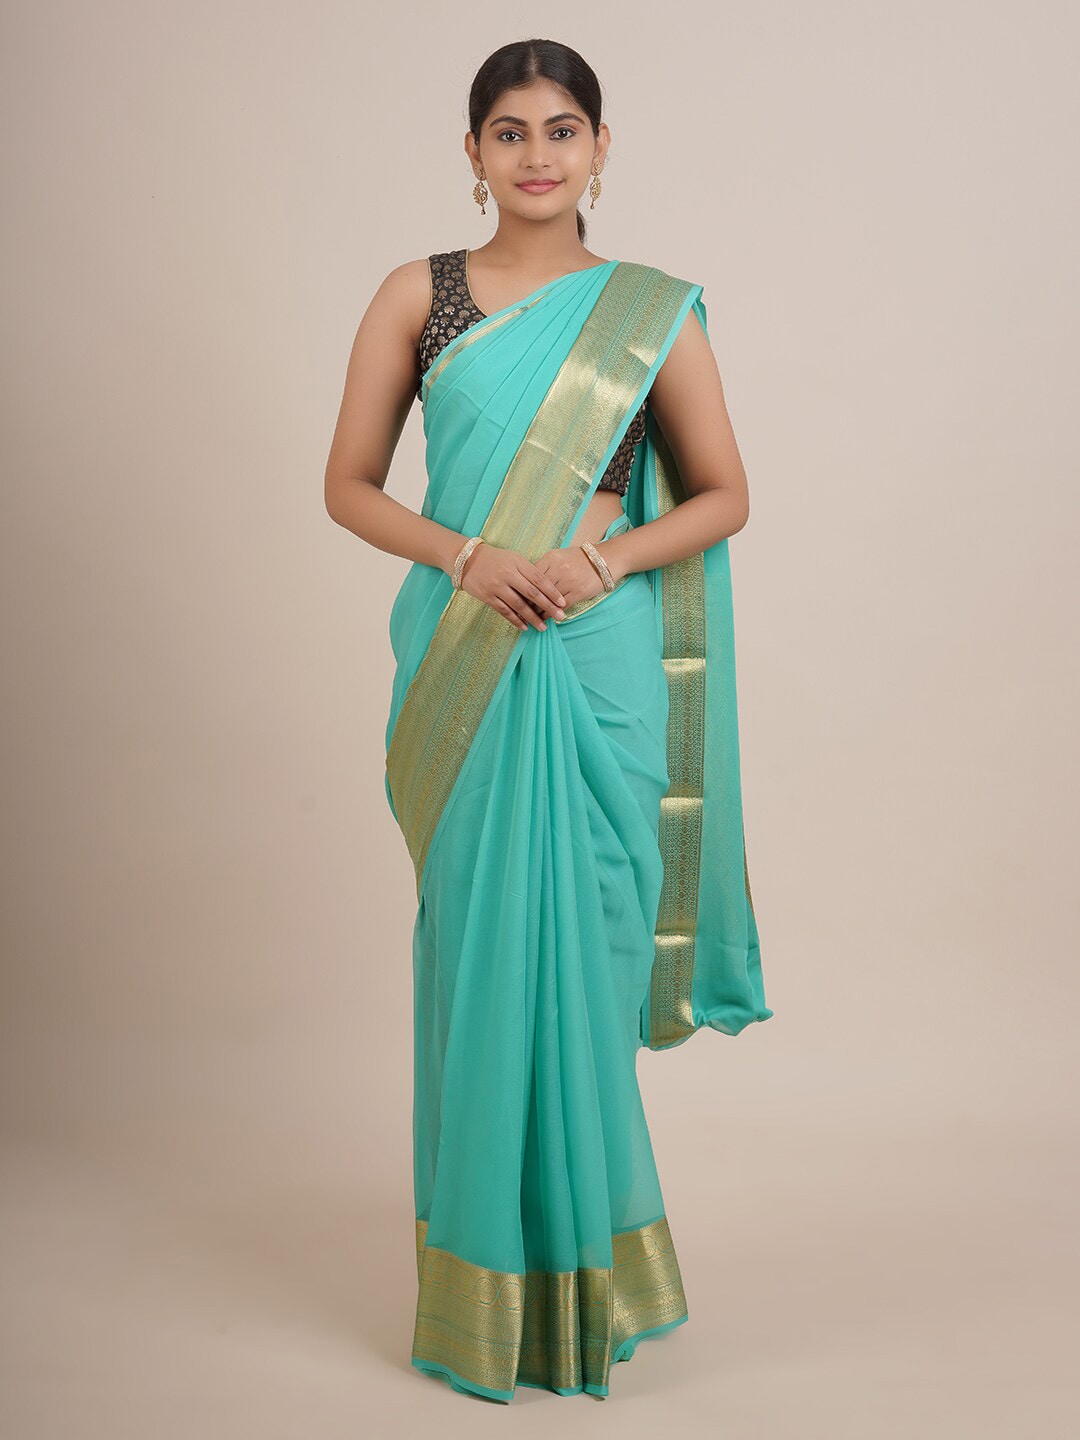 Pothys Blue & Gold-Toned Pure Silk Saree Price in India